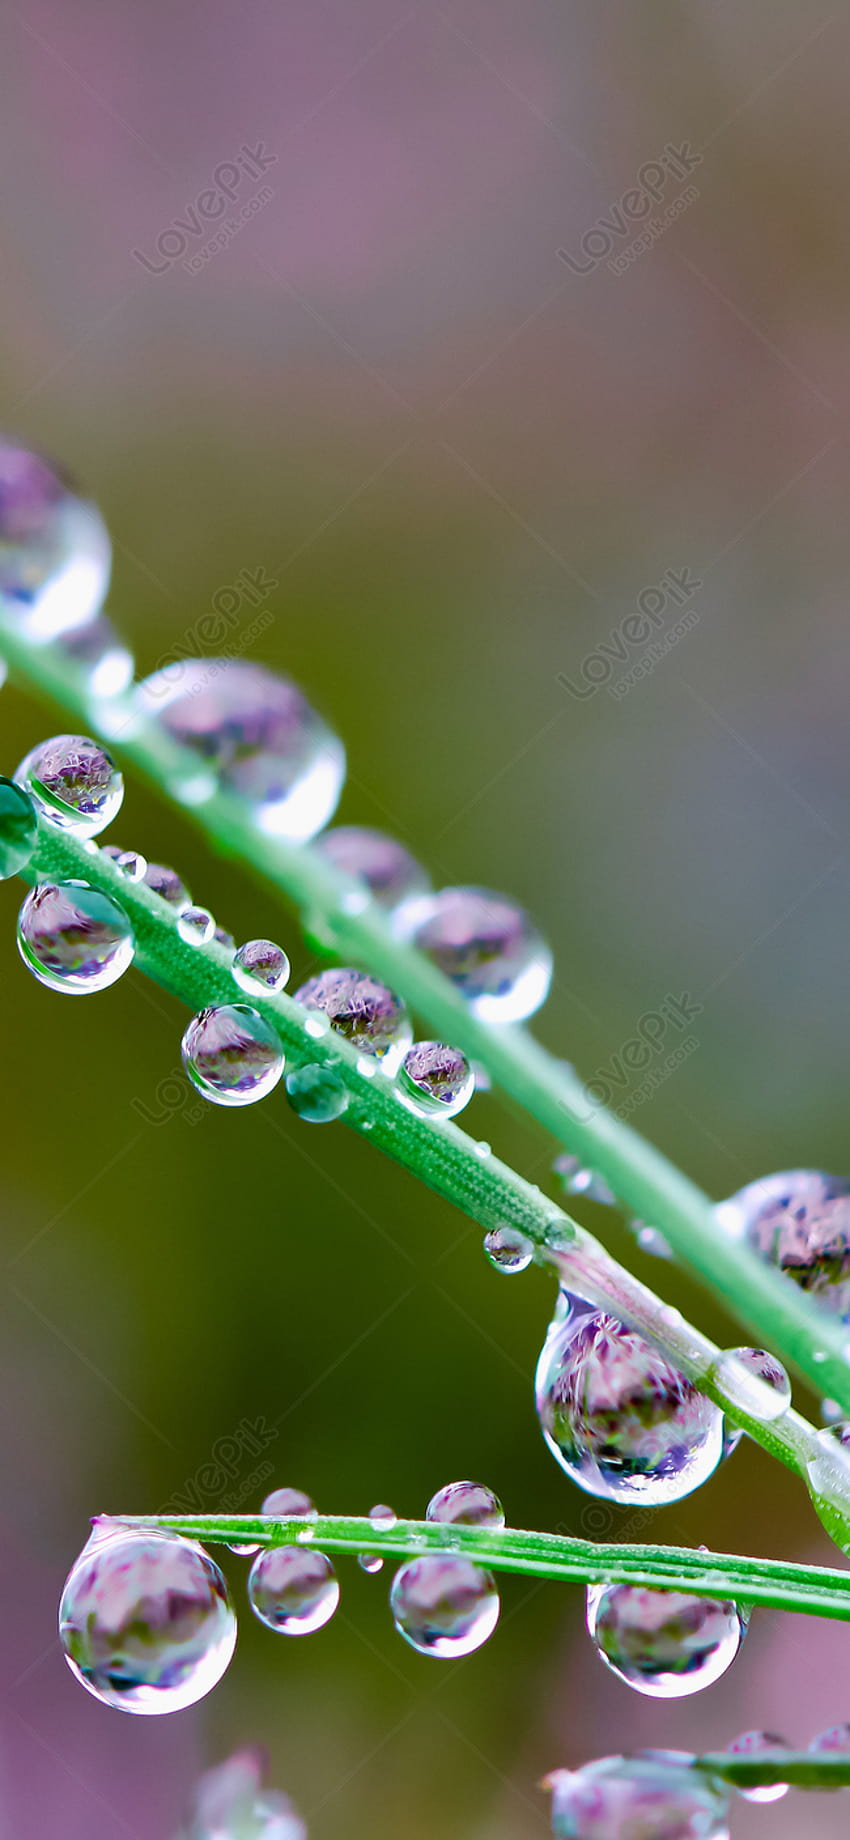 Dewdrop Mobile Backgrounds on Lovepik, dewdrops HD phone wallpaper